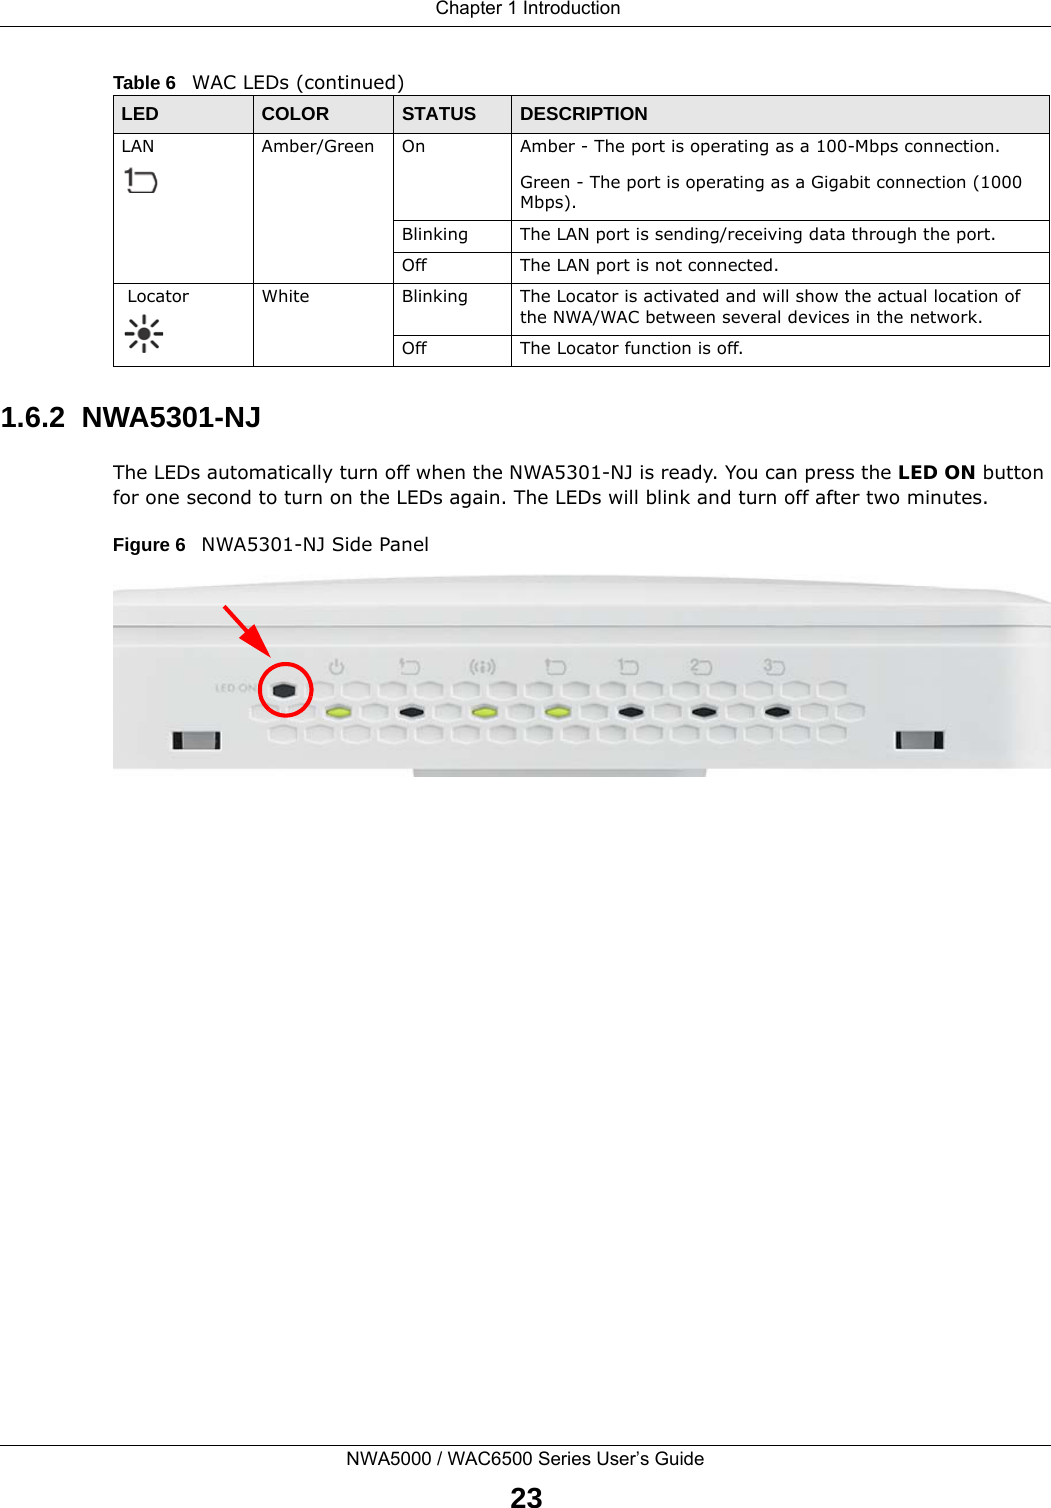  Chapter 1 IntroductionNWA5000 / WAC6500 Series User’s Guide231.6.2  NWA5301-NJThe LEDs automatically turn off when the NWA5301-NJ is ready. You can press the LED ON button for one second to turn on the LEDs again. The LEDs will blink and turn off after two minutes.Figure 6   NWA5301-NJ Side Panel LAN Amber/Green On Amber - The port is operating as a 100-Mbps connection.Green - The port is operating as a Gigabit connection (1000 Mbps).Blinking The LAN port is sending/receiving data through the port.Off The LAN port is not connected. Locator White Blinking The Locator is activated and will show the actual location of the NWA/WAC between several devices in the network.Off The Locator function is off.Table 6   WAC LEDs (continued)LED COLOR STATUS DESCRIPTION